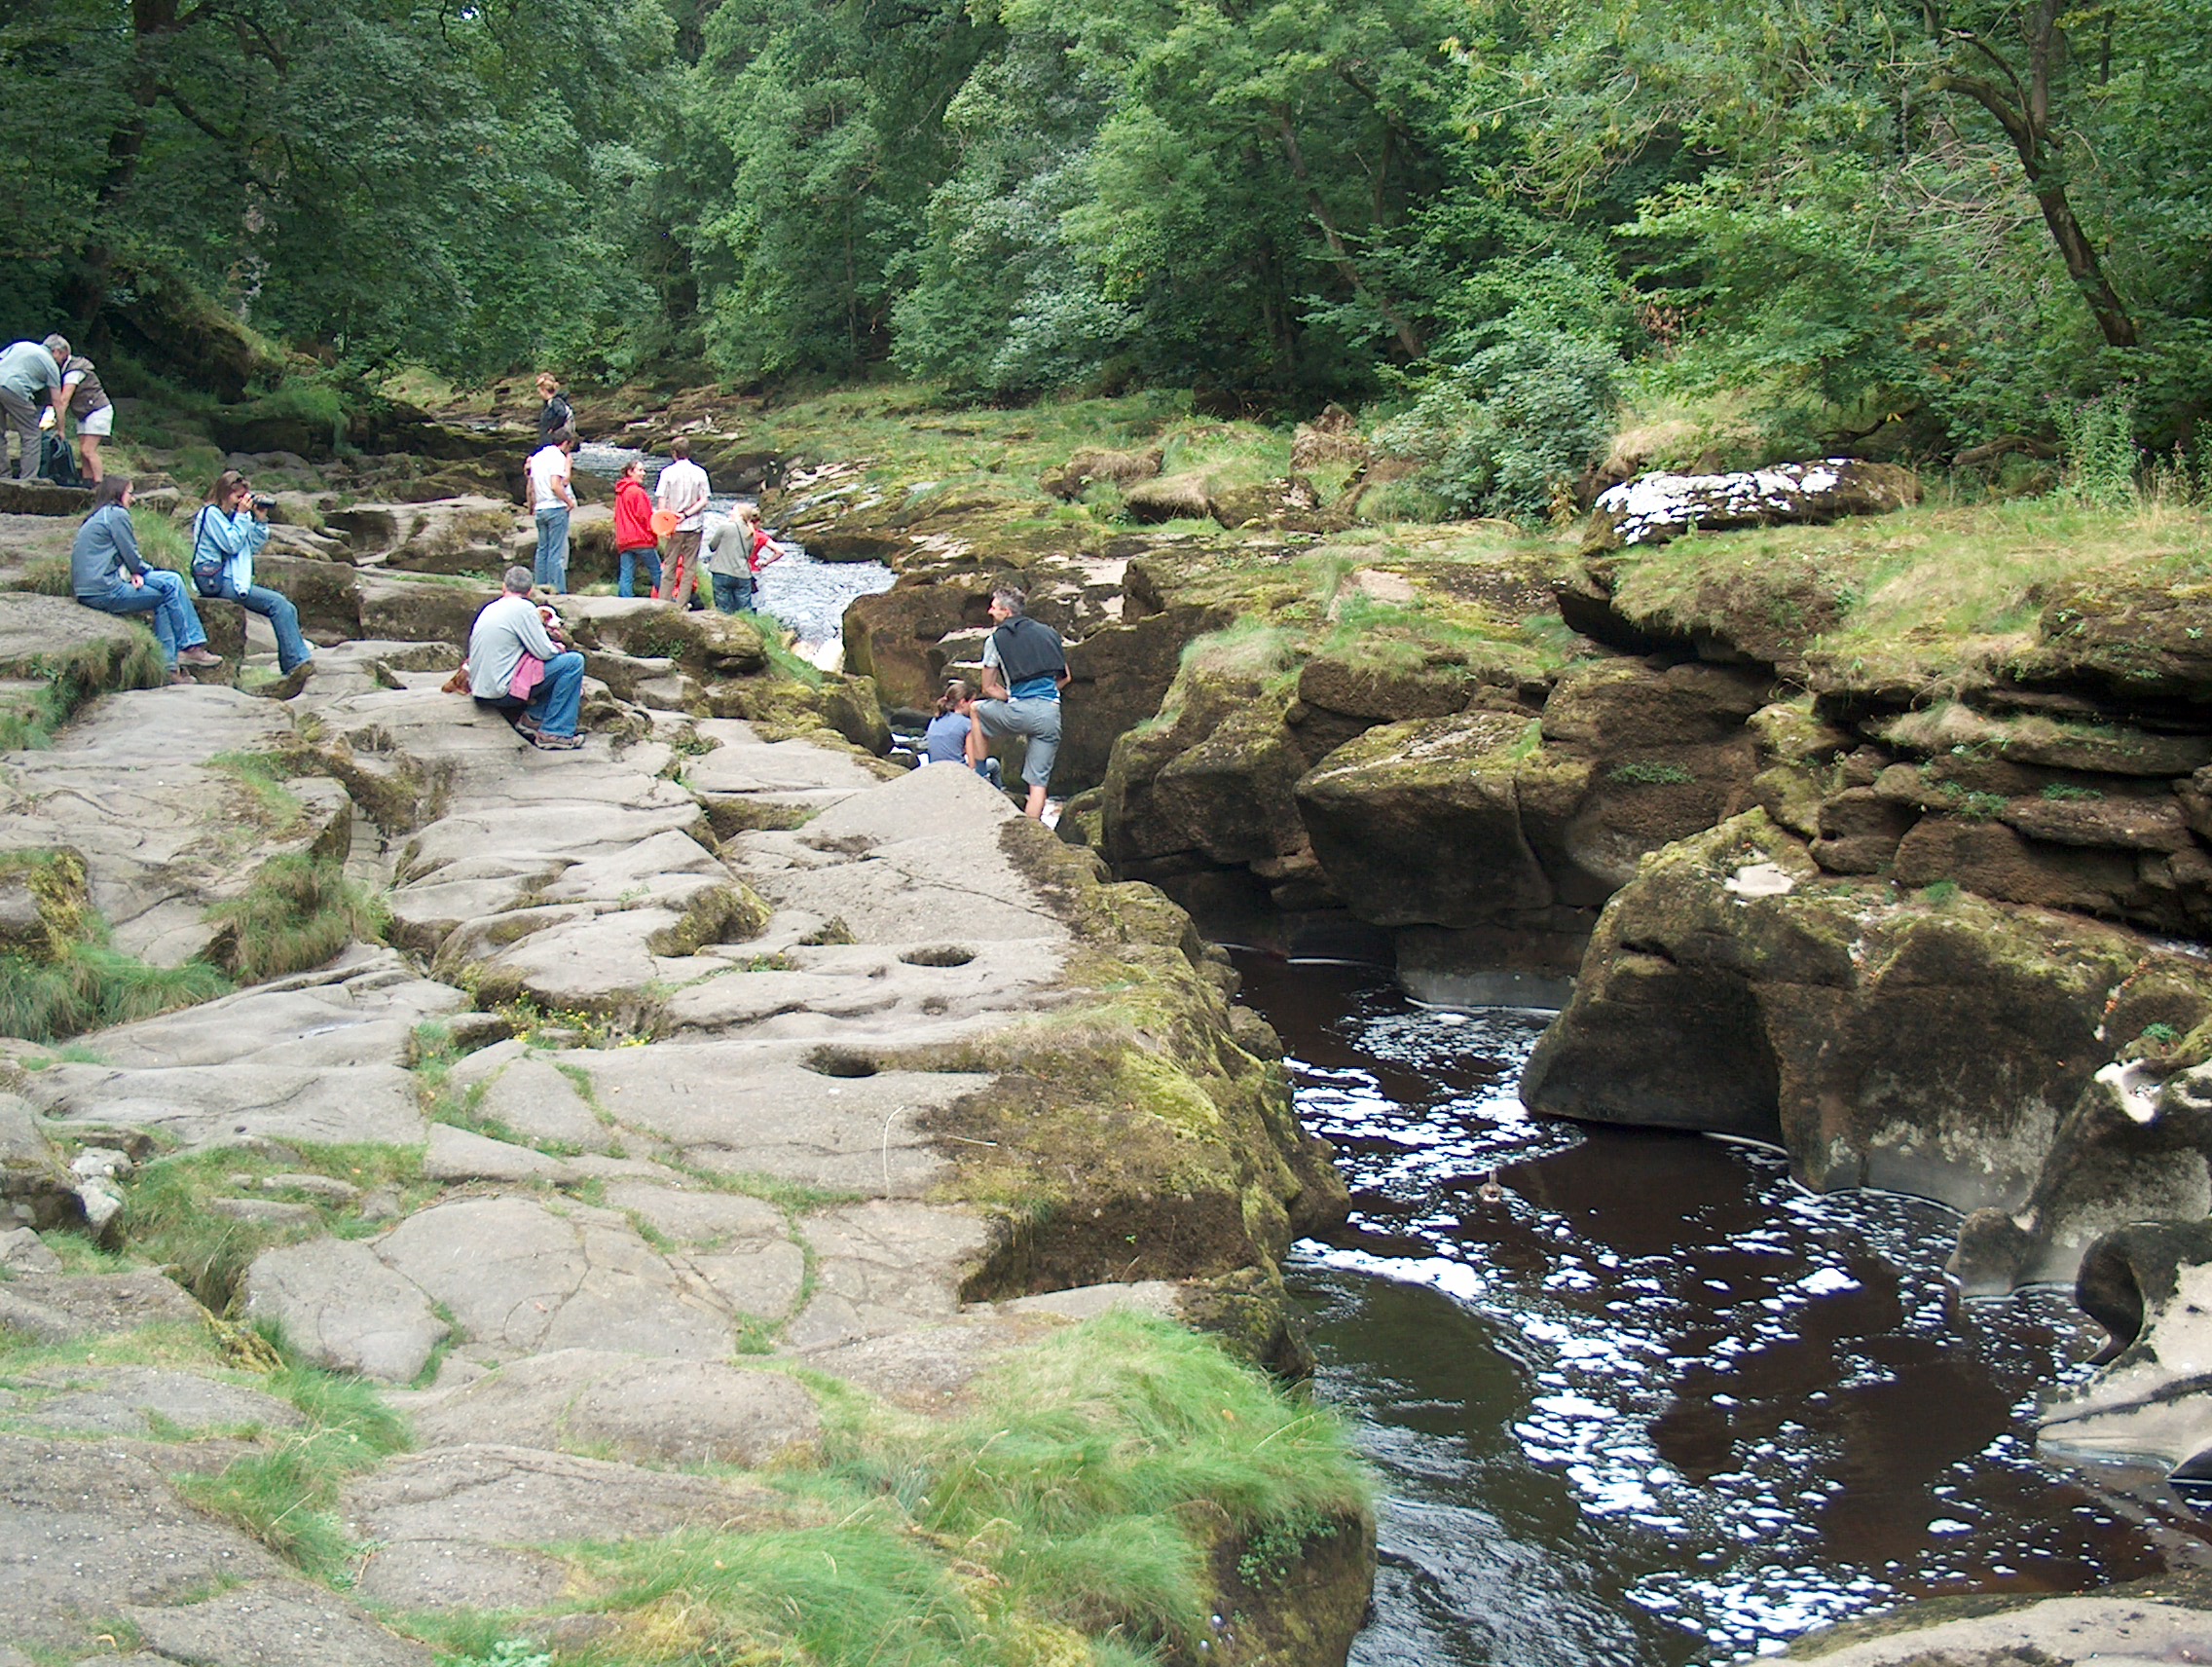 The_Strid_in_summer_-_geograph.org.uk_-_1733260